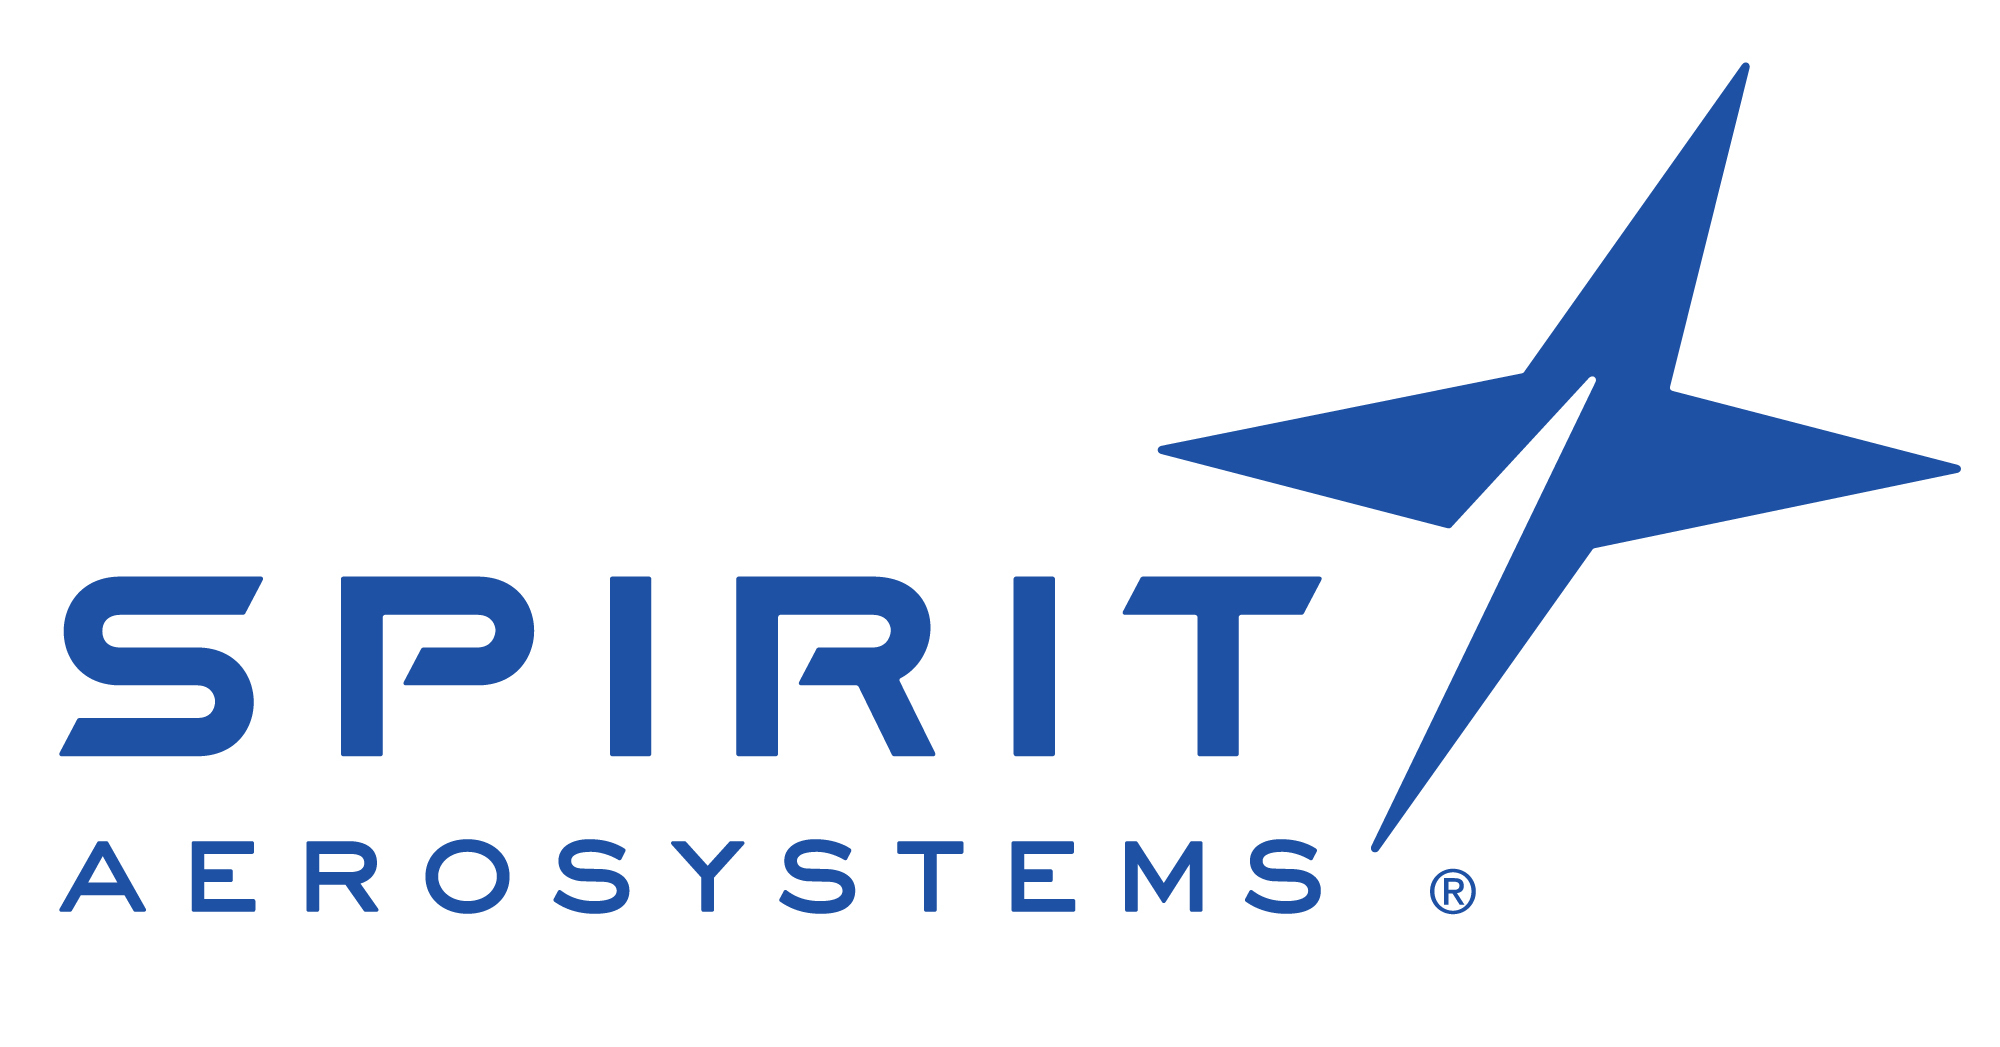 spirit-aerosystems-announces-solid-third-quarter-2017-operating-results-with-eps-up-9-y-y-and